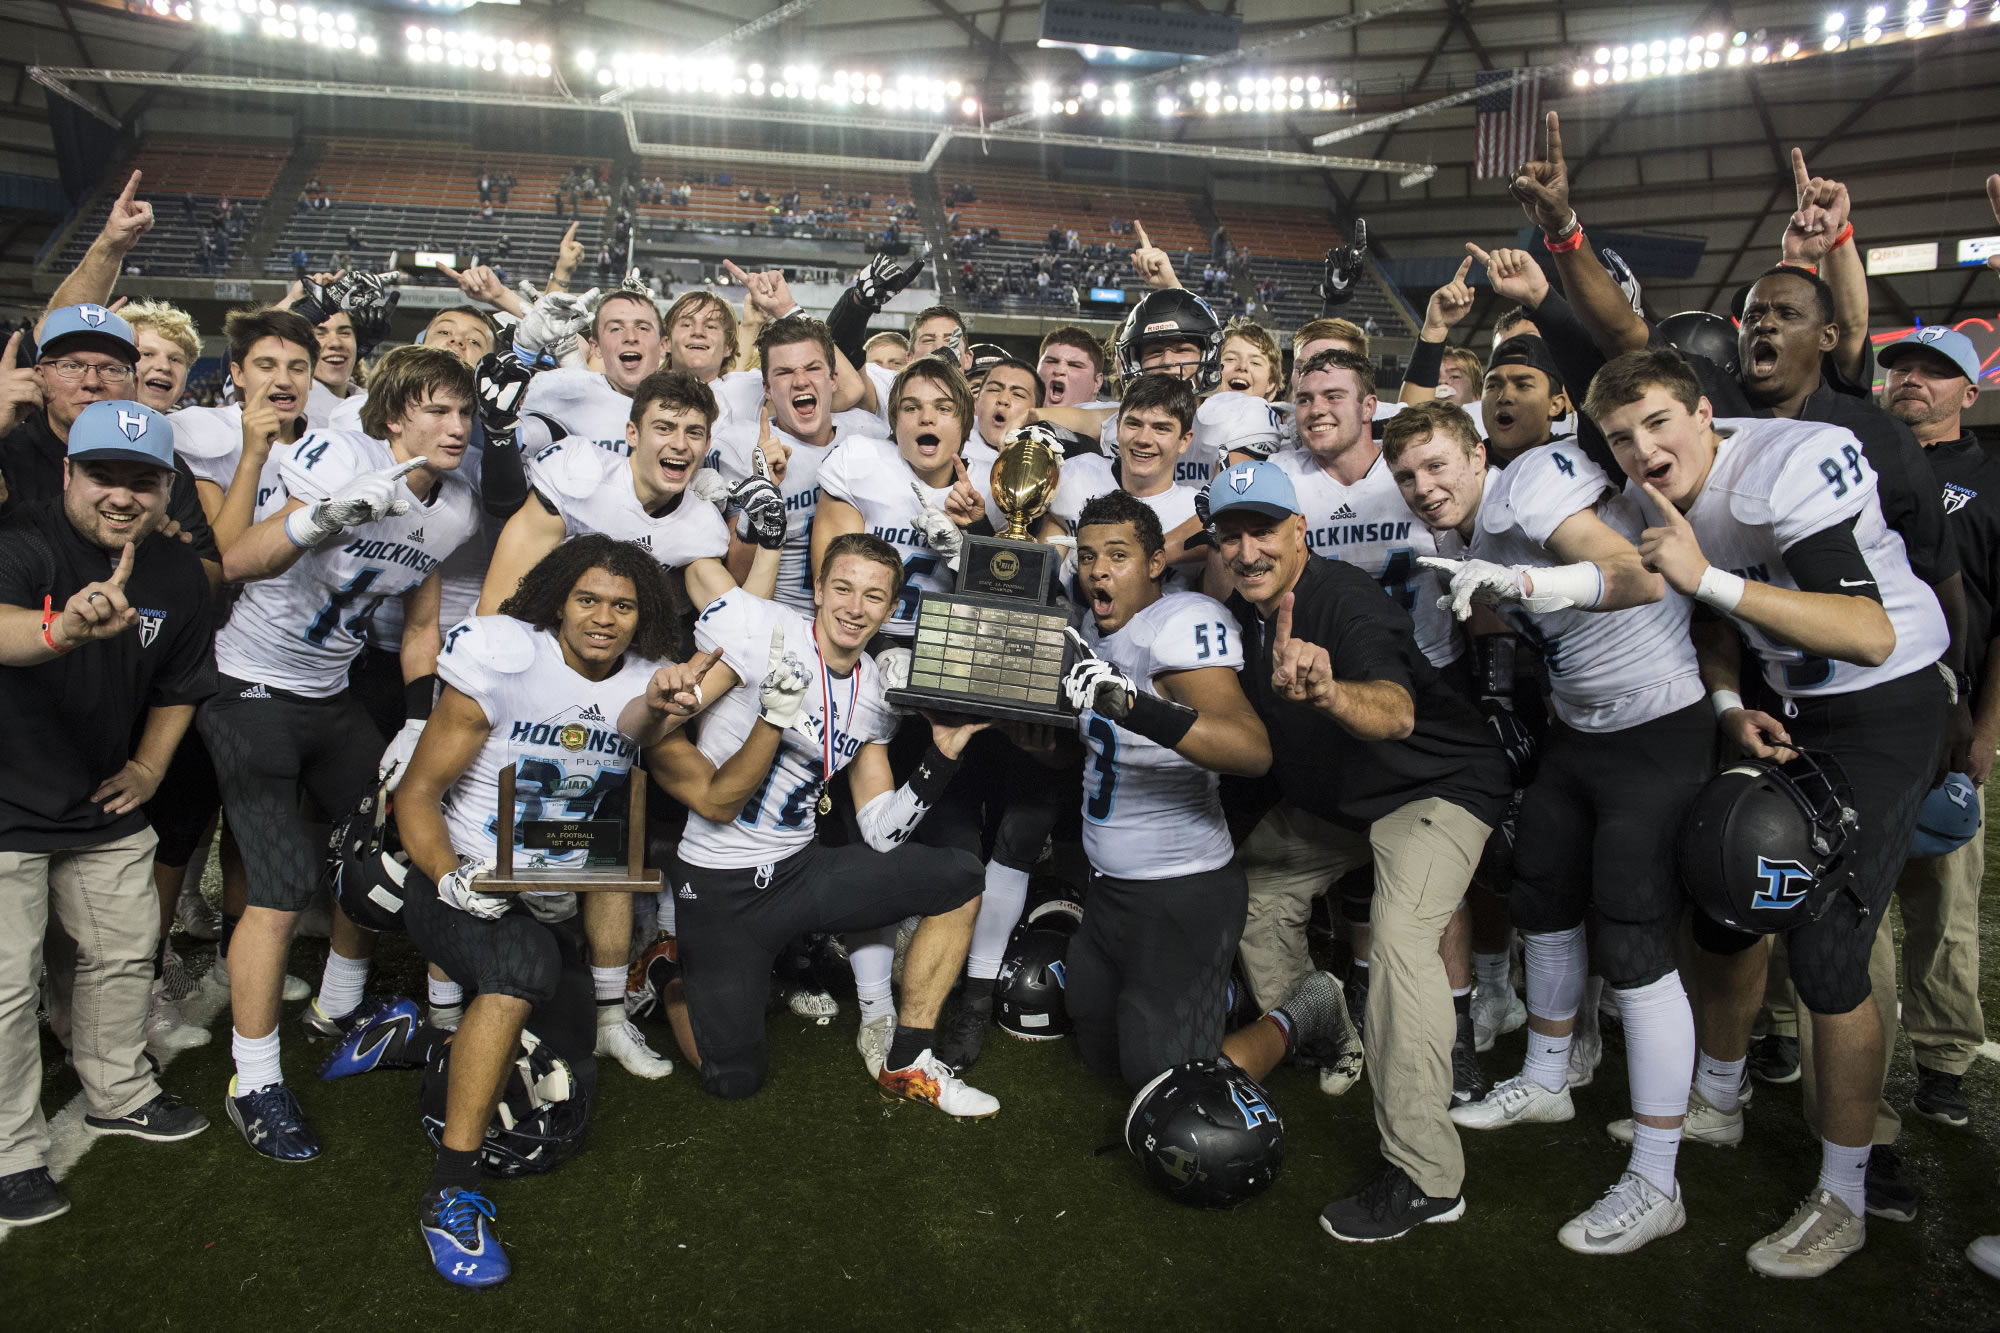 Hockinson celebrates their win against Tumwater after the 2A state football championship game Saturday, Dec. 2, 2017, in Tacoma, Wash.